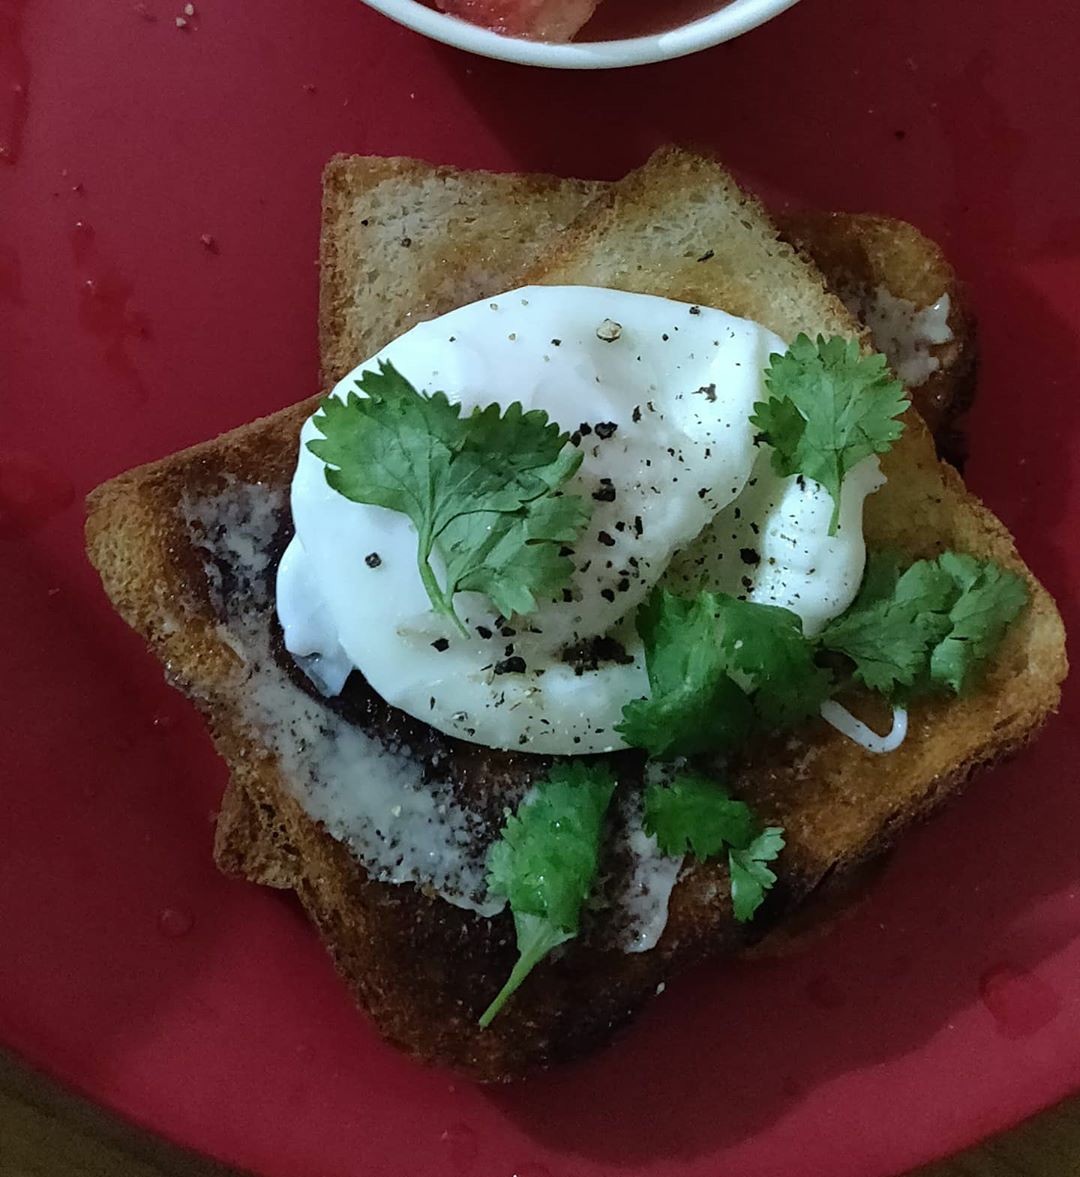 A friend l posted a picture of her poached egg experiment which made me pipe up about mine. I'd been making my breakfast in a fog of irritation at the weather & confinement. Our chat made me think of the food reading I've liked, the ones I didn't.